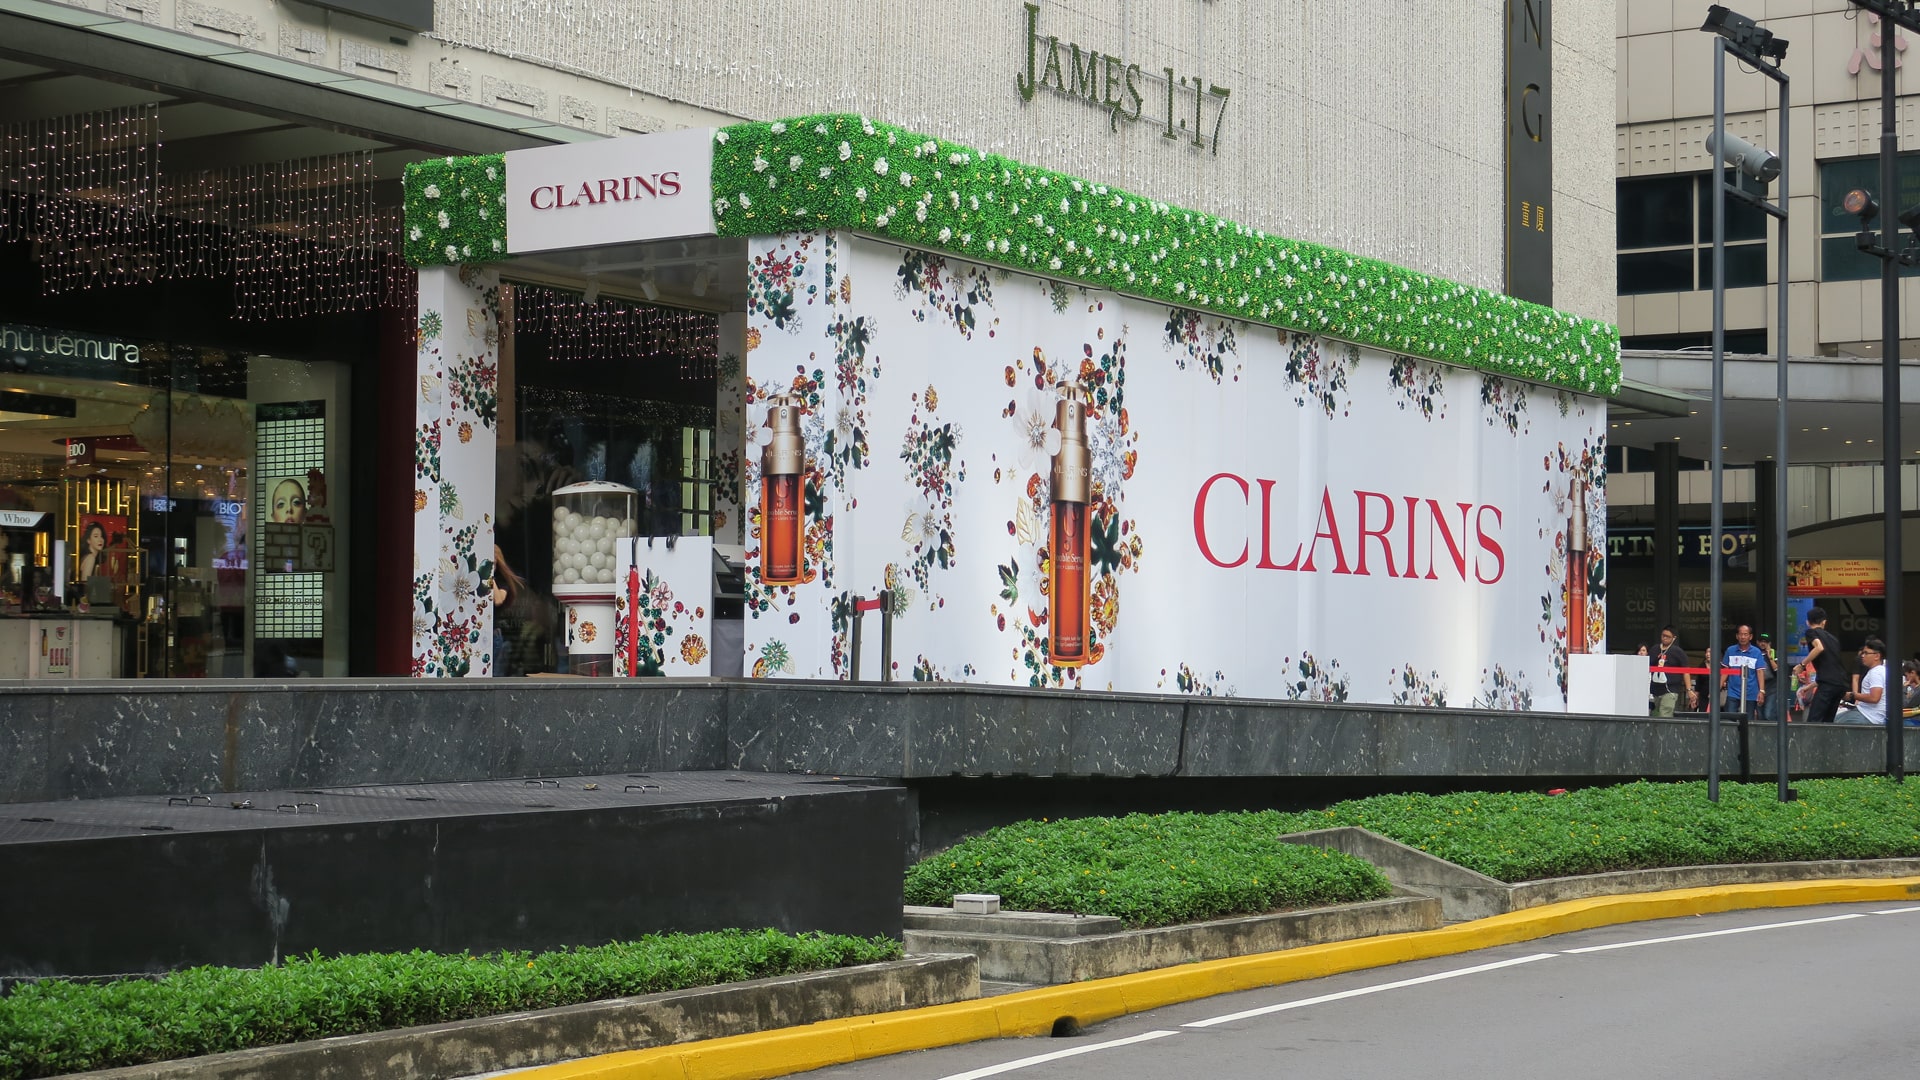 tsc_opt-images_tubelar-system_clarins-pop-up-beauty-store-1920x1080-03-min